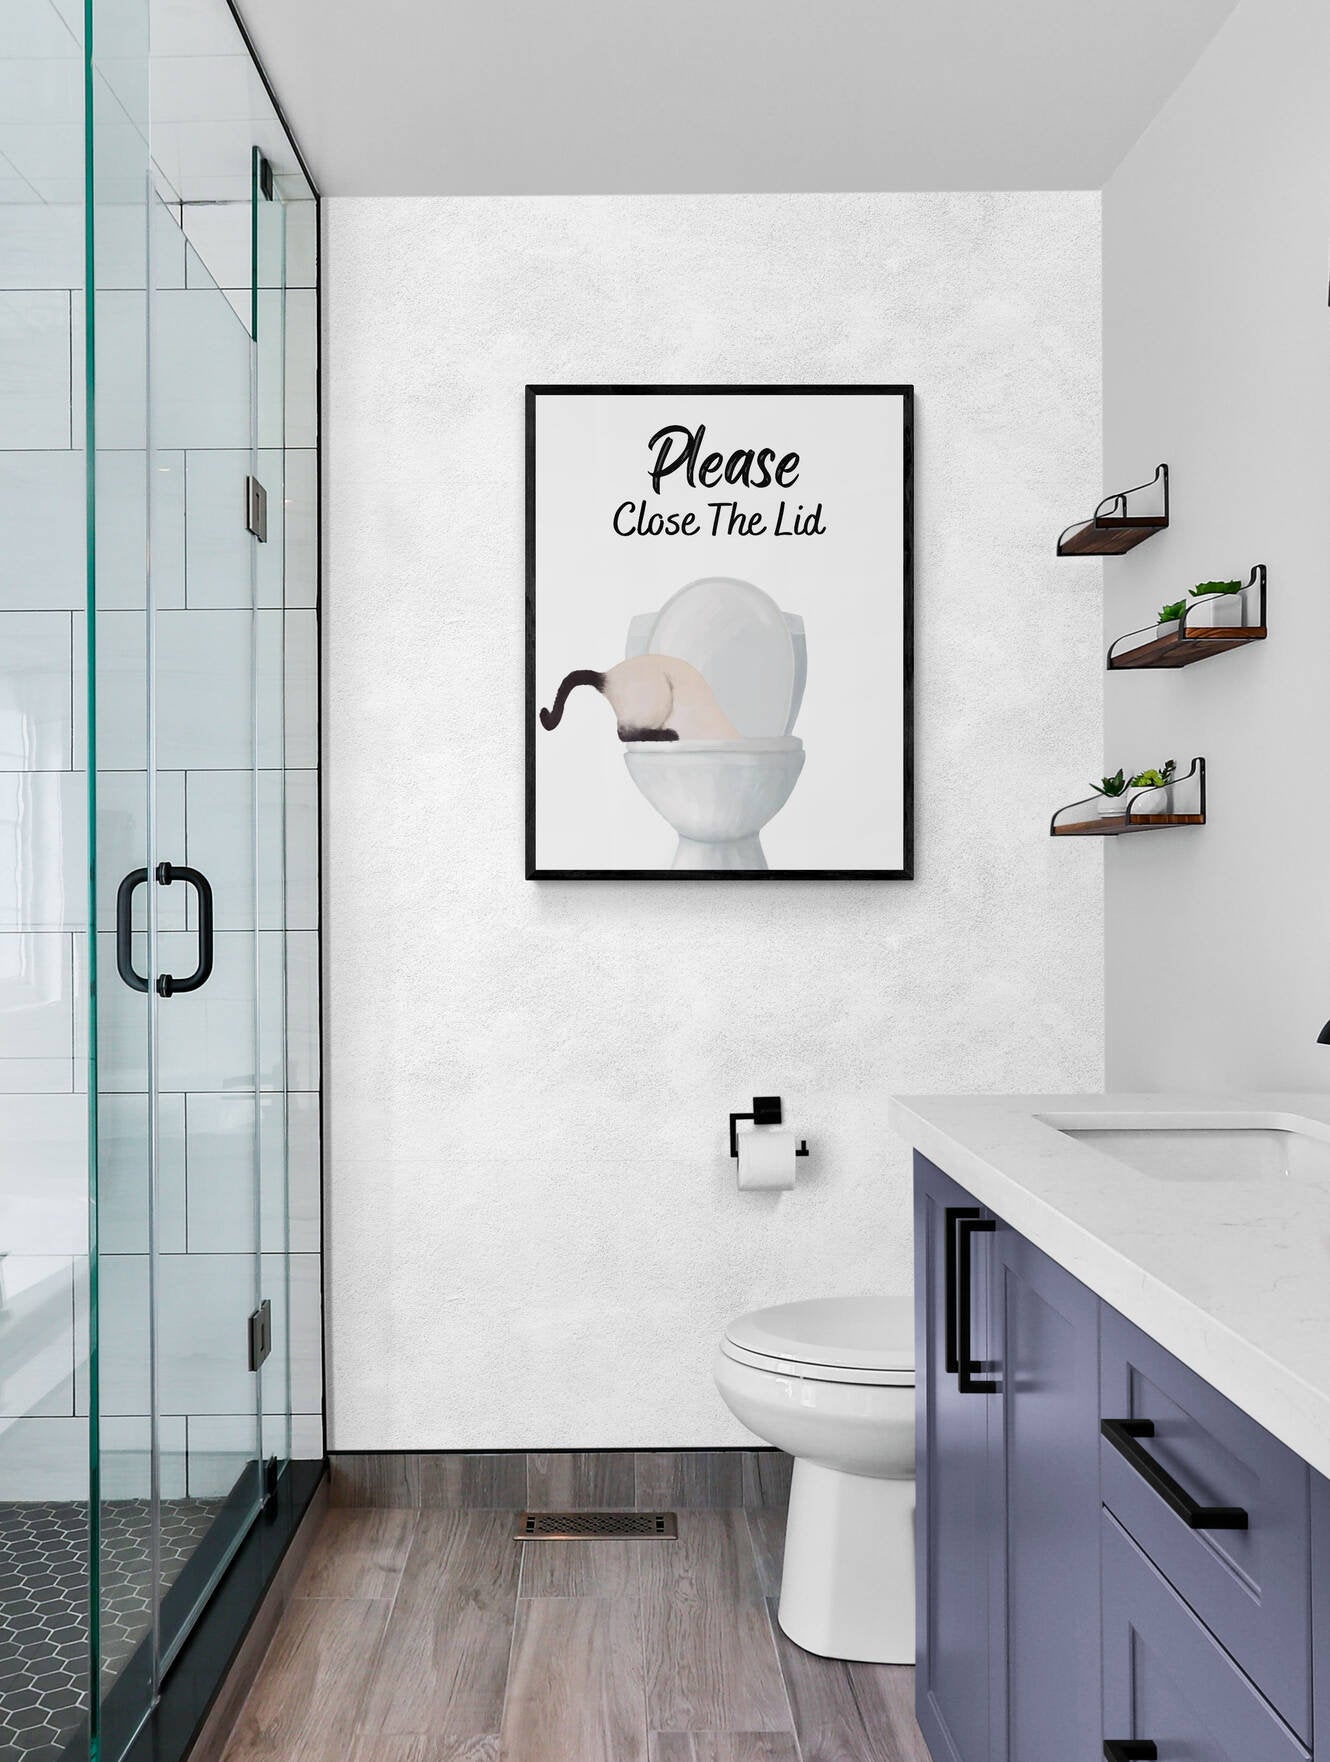 Siamese Cat Drinking Water From Toilet Sign, Fat Siamese Cat Print, Bathroom Decor, Cat Painting, Kitty Licking Water From Toilet Art